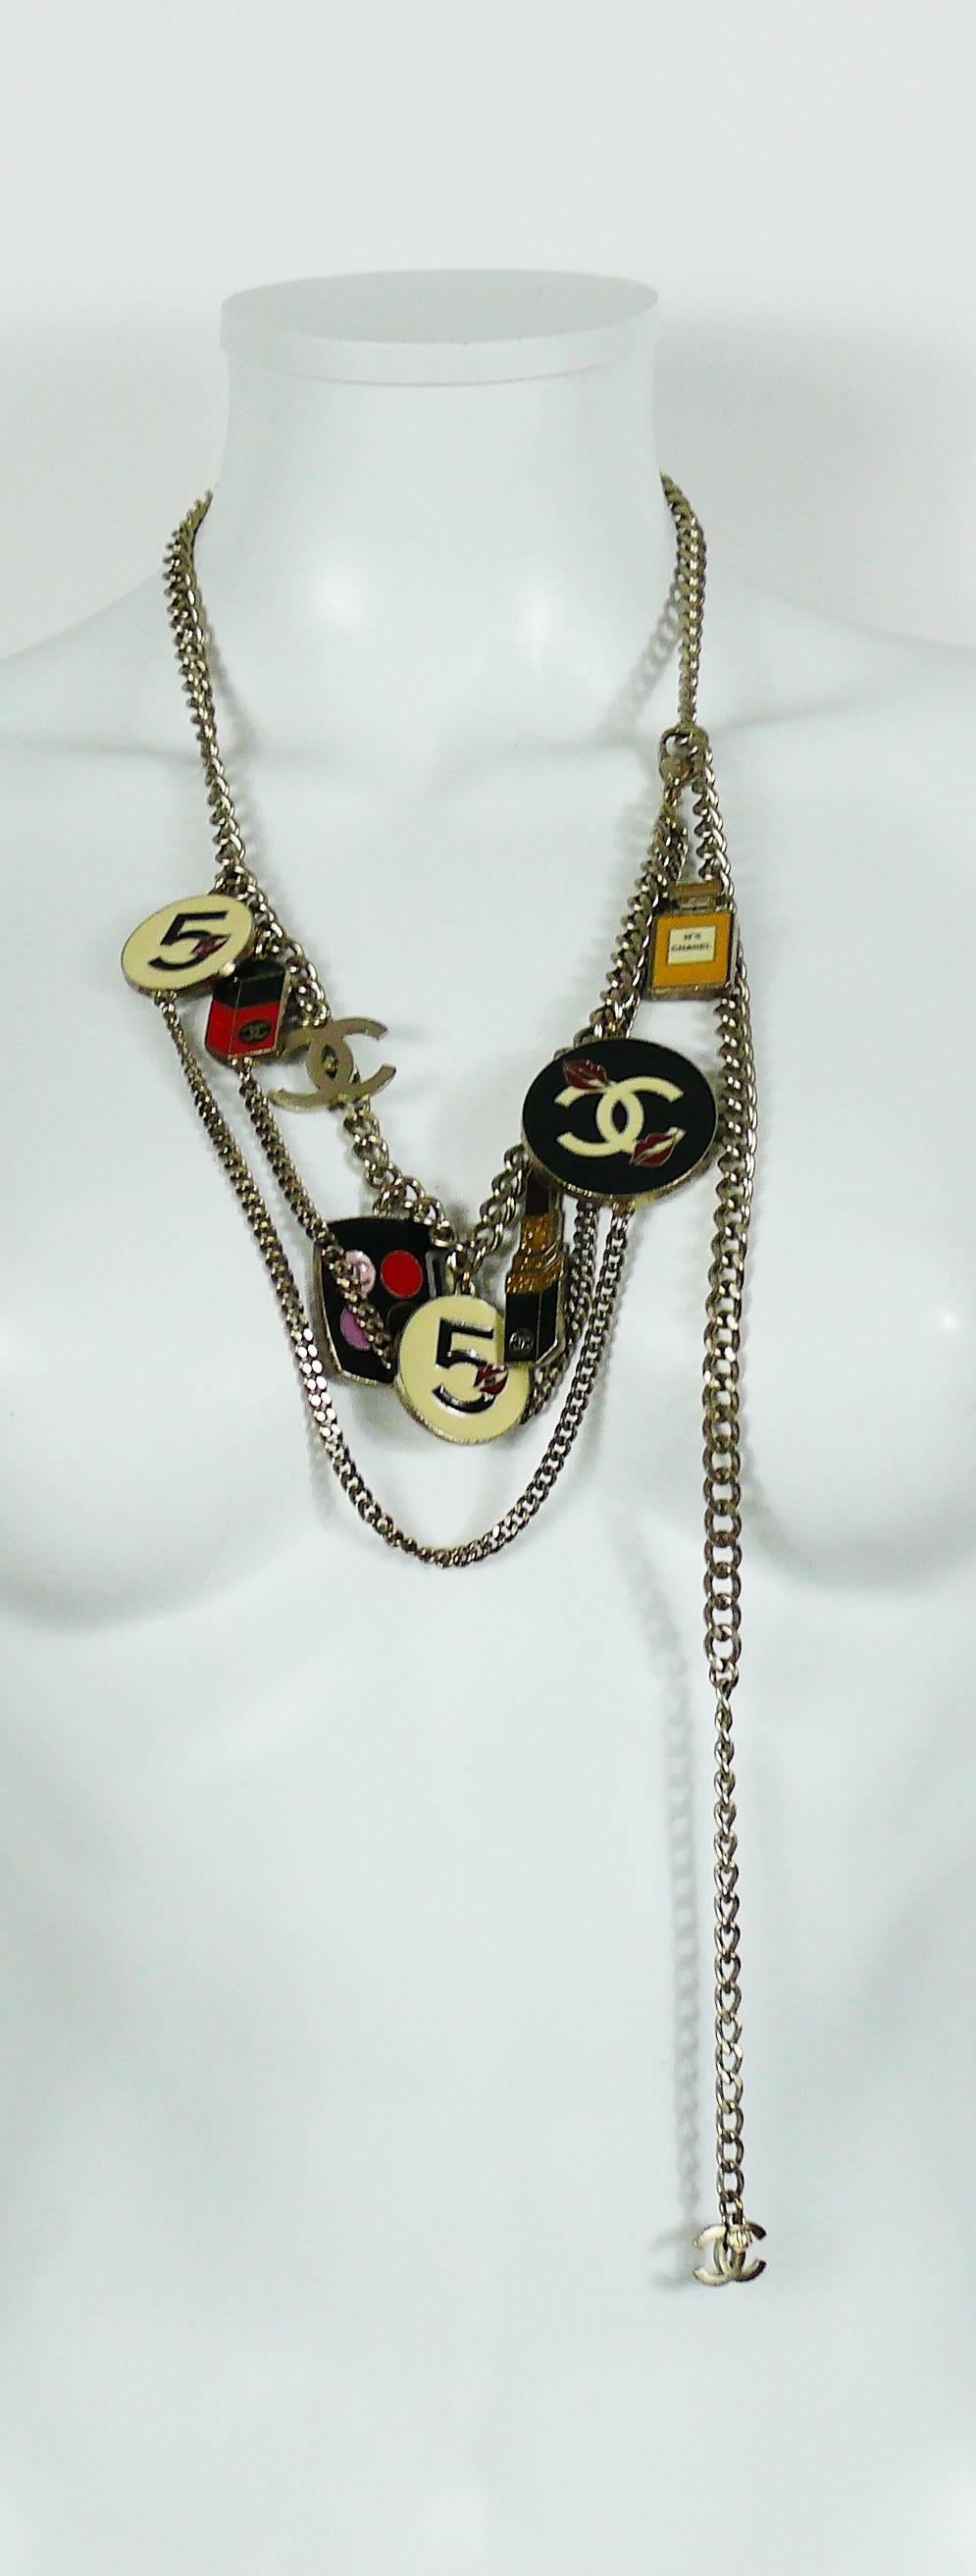 Gray Chanel Rare Fall 2004 Make-Up Charm Runway Belt Necklace